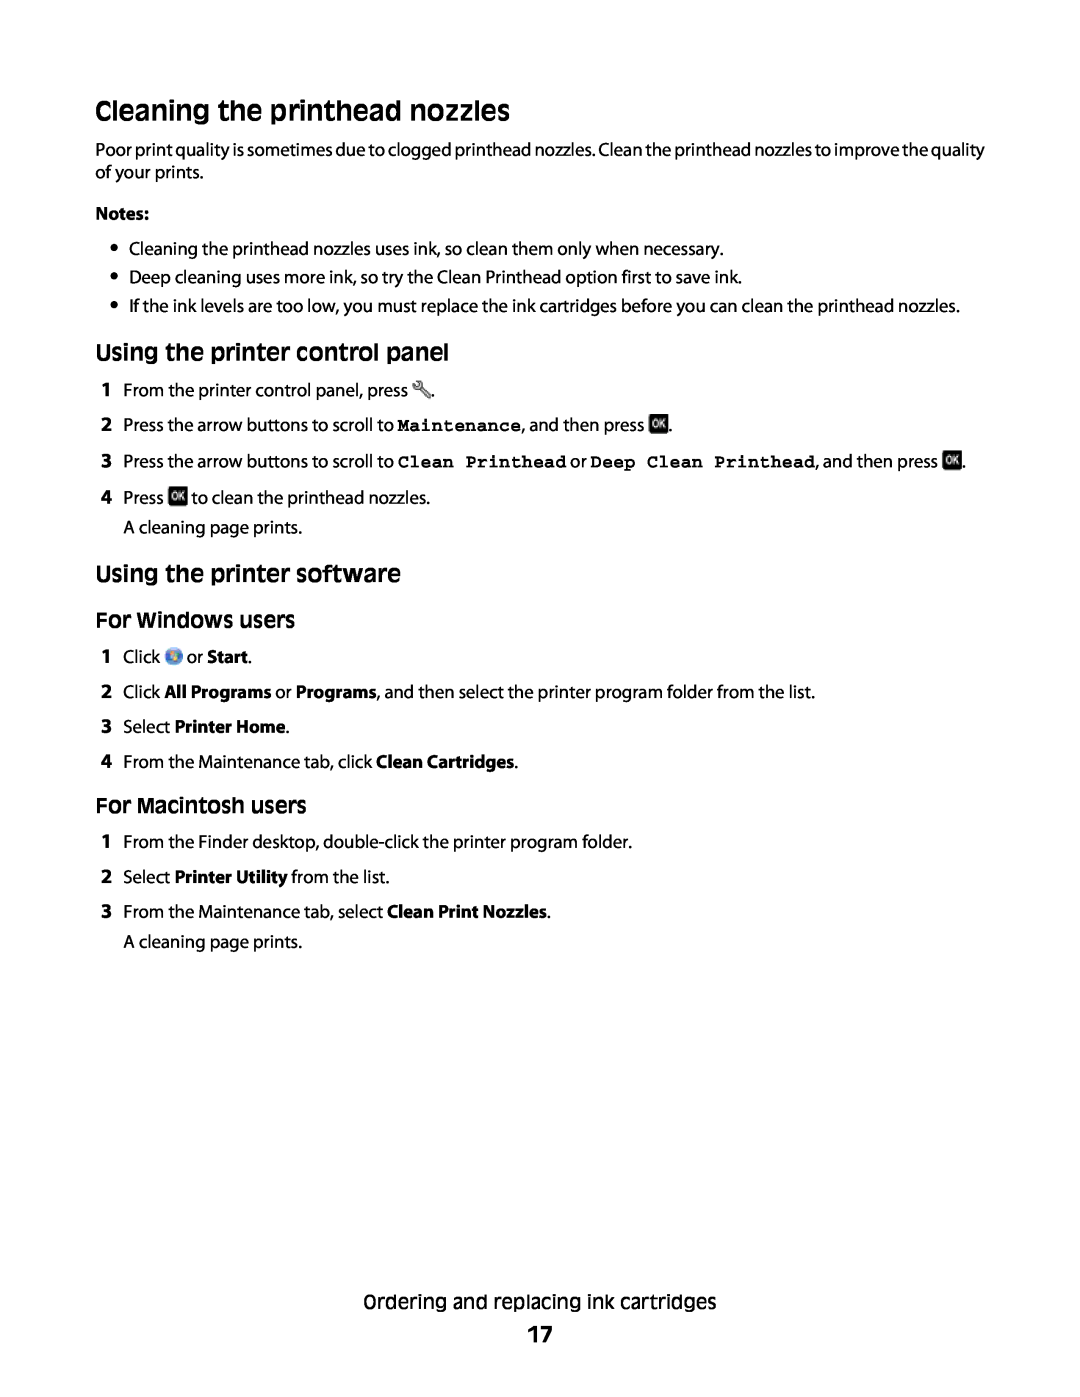 Lexmark S300 manual Using the printer control panel, Using the printer software, For Windows users, For Macintosh users 